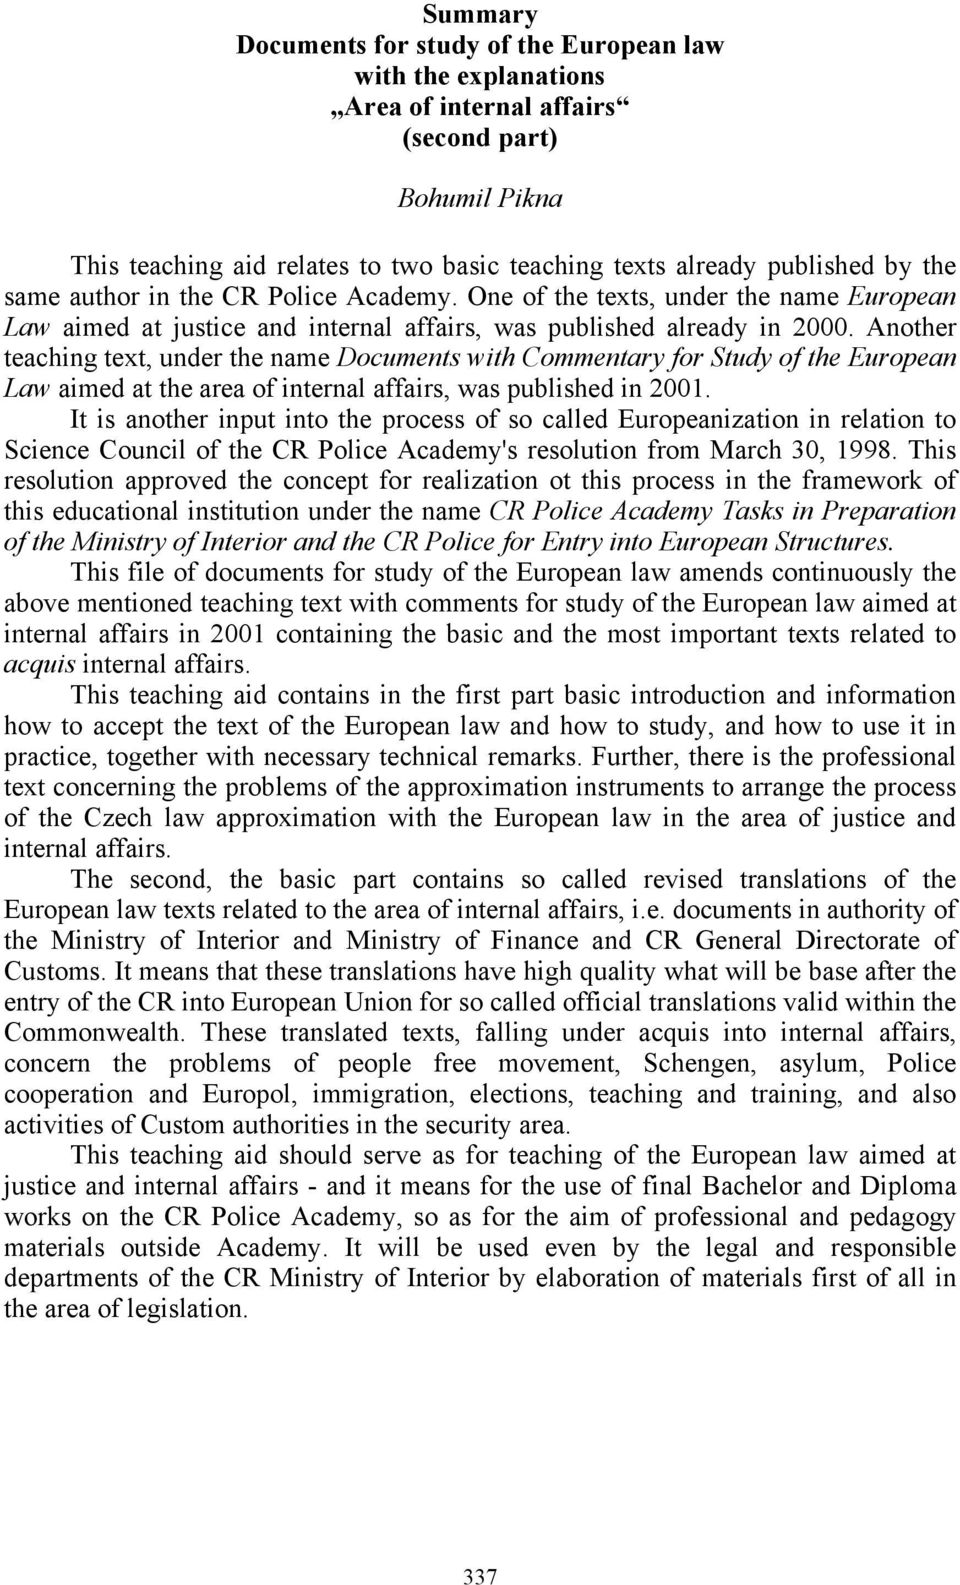 Another teaching text, under the name Documents with Commentary for Study of the European Law aimed at the area of internal affairs, was published in 2001.